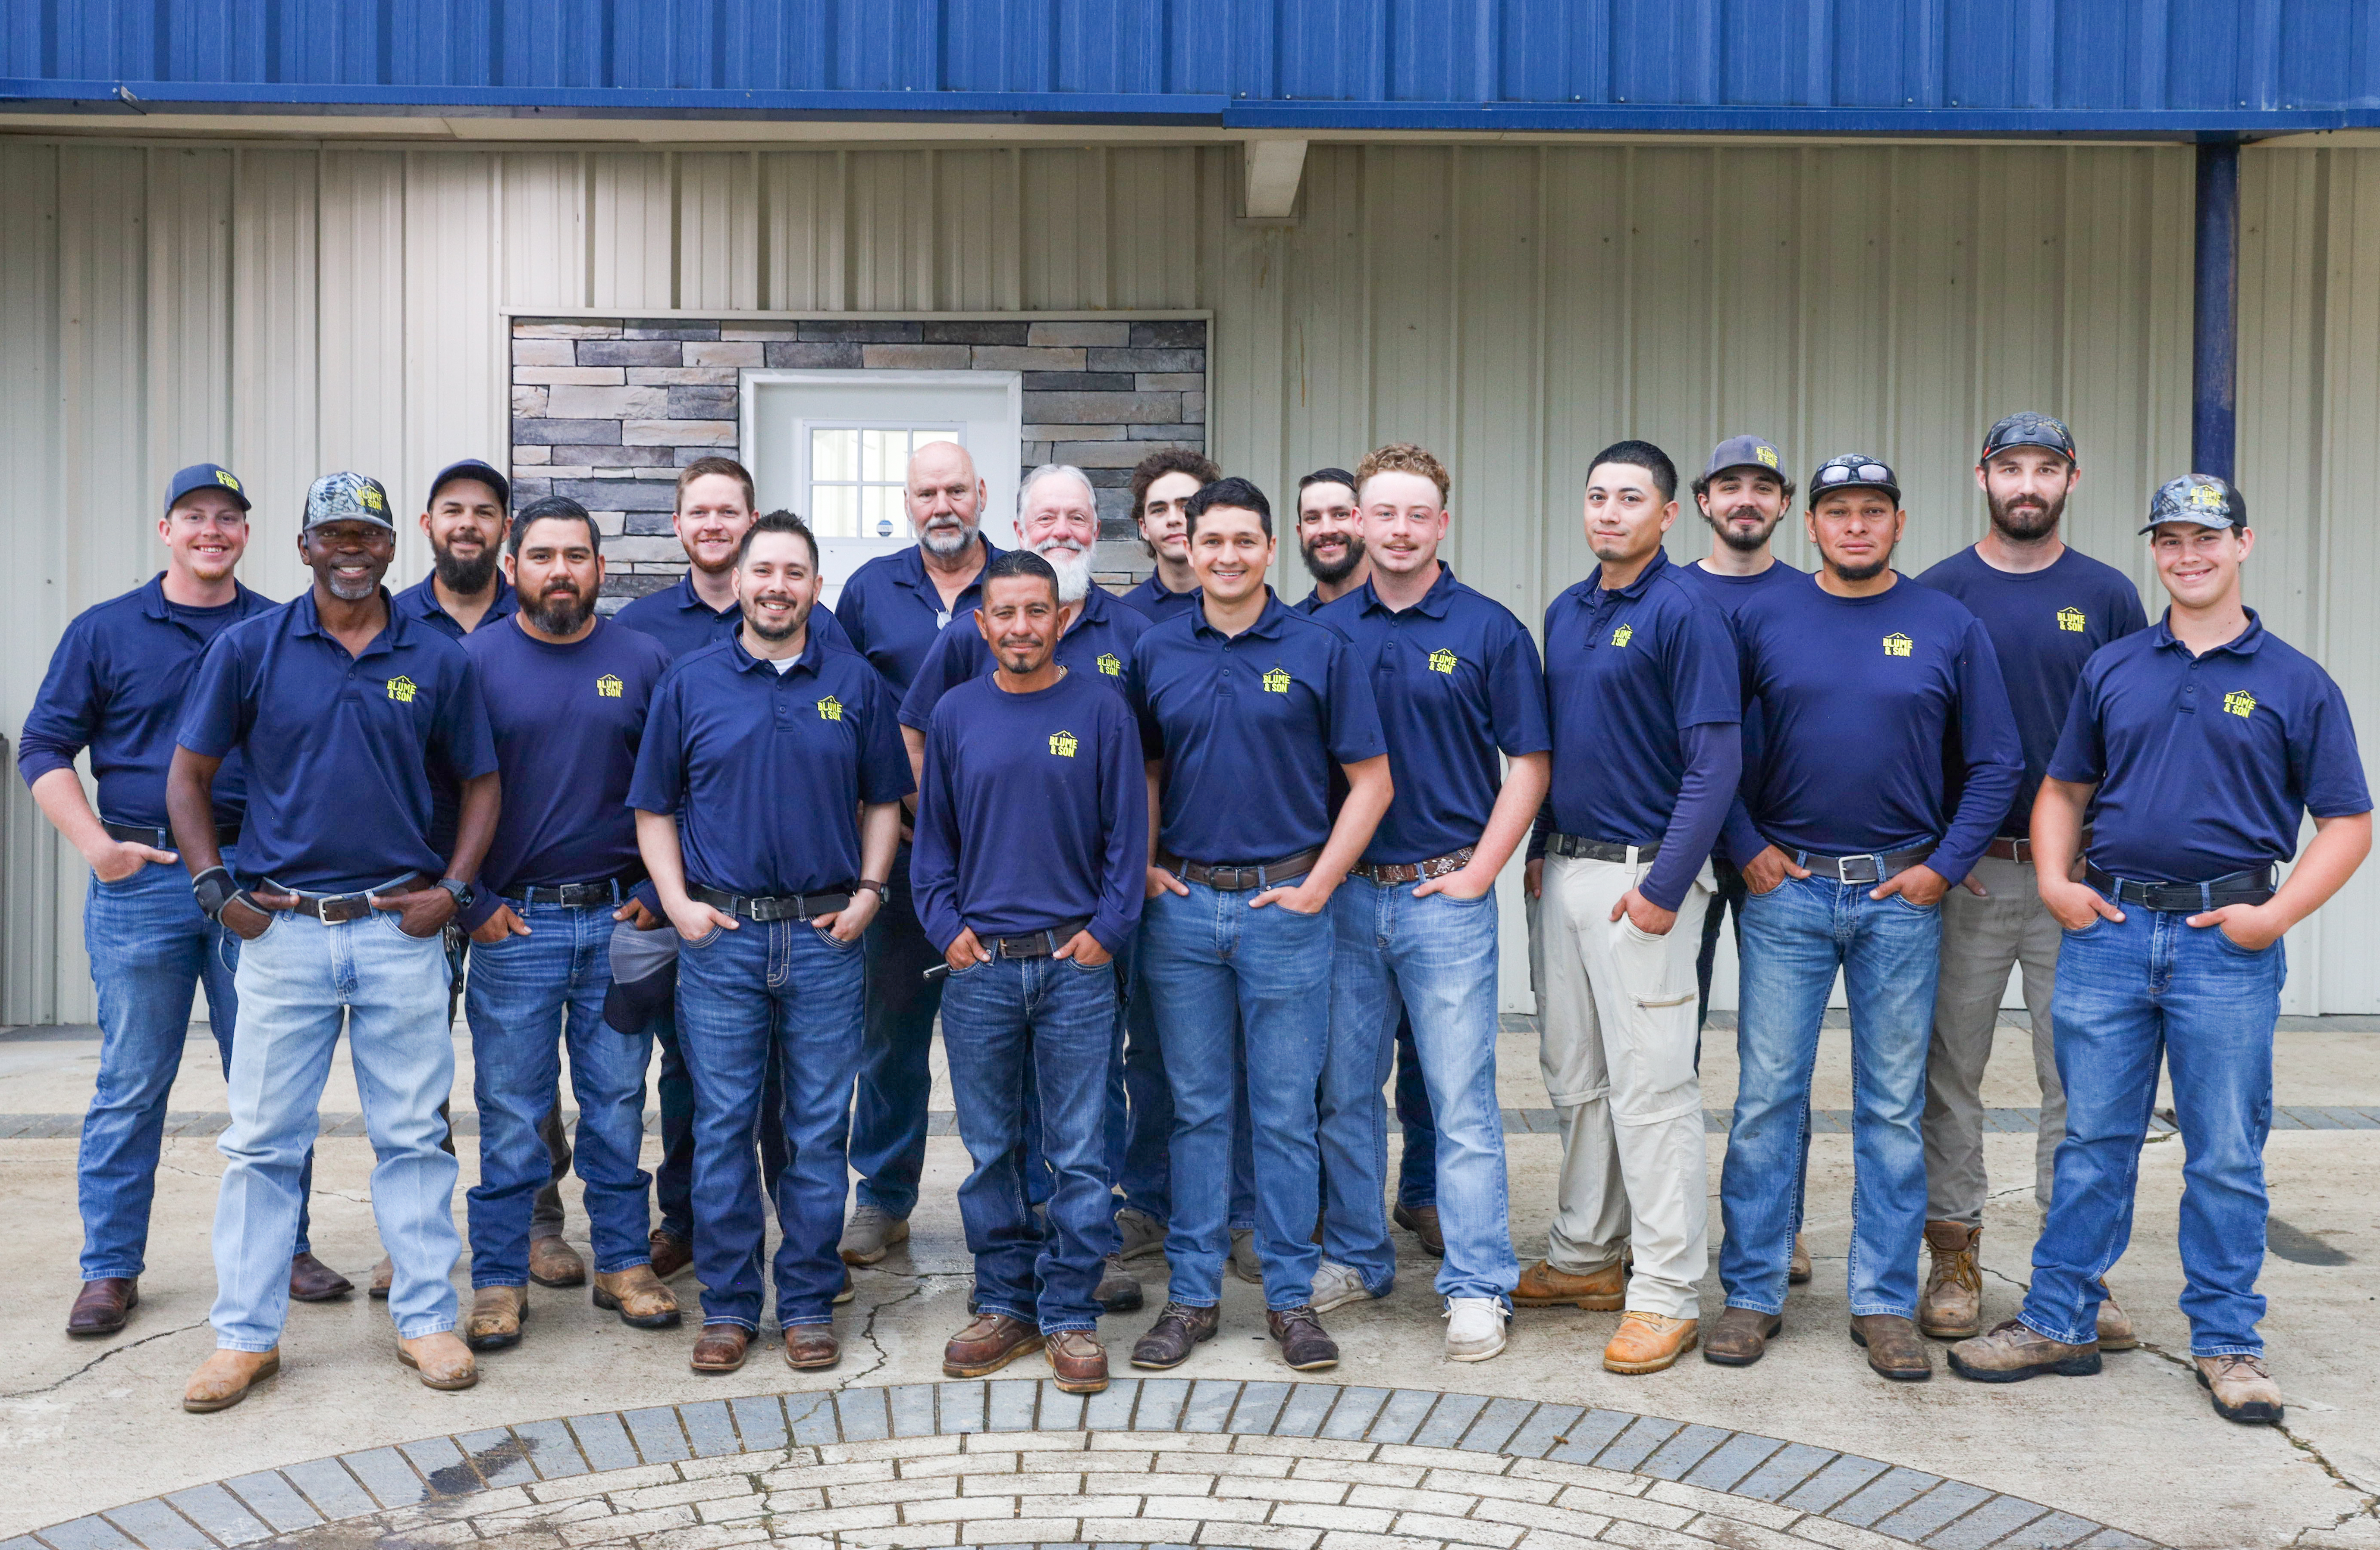 About Our Company in Lufkin Texas